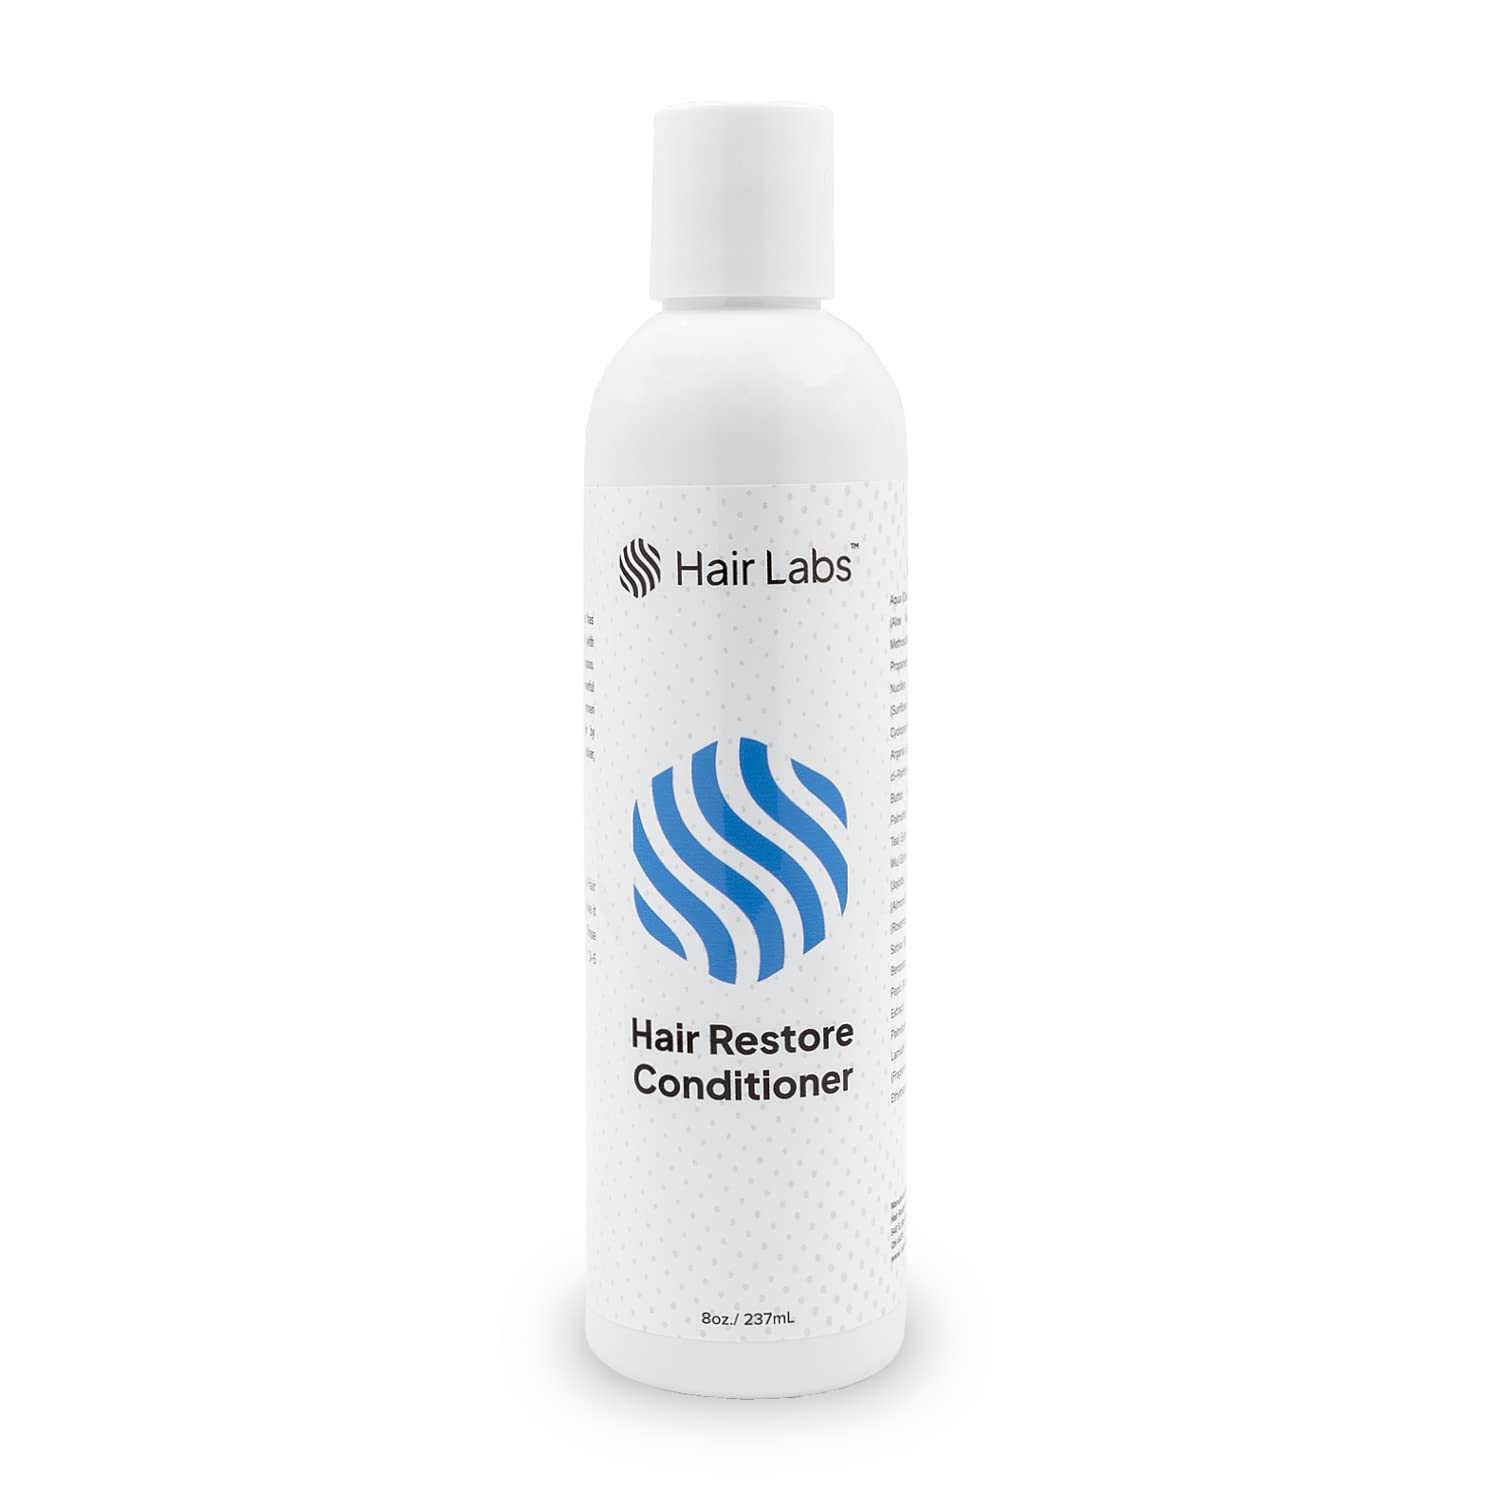 Hair Labs Hair Restore Conditioner